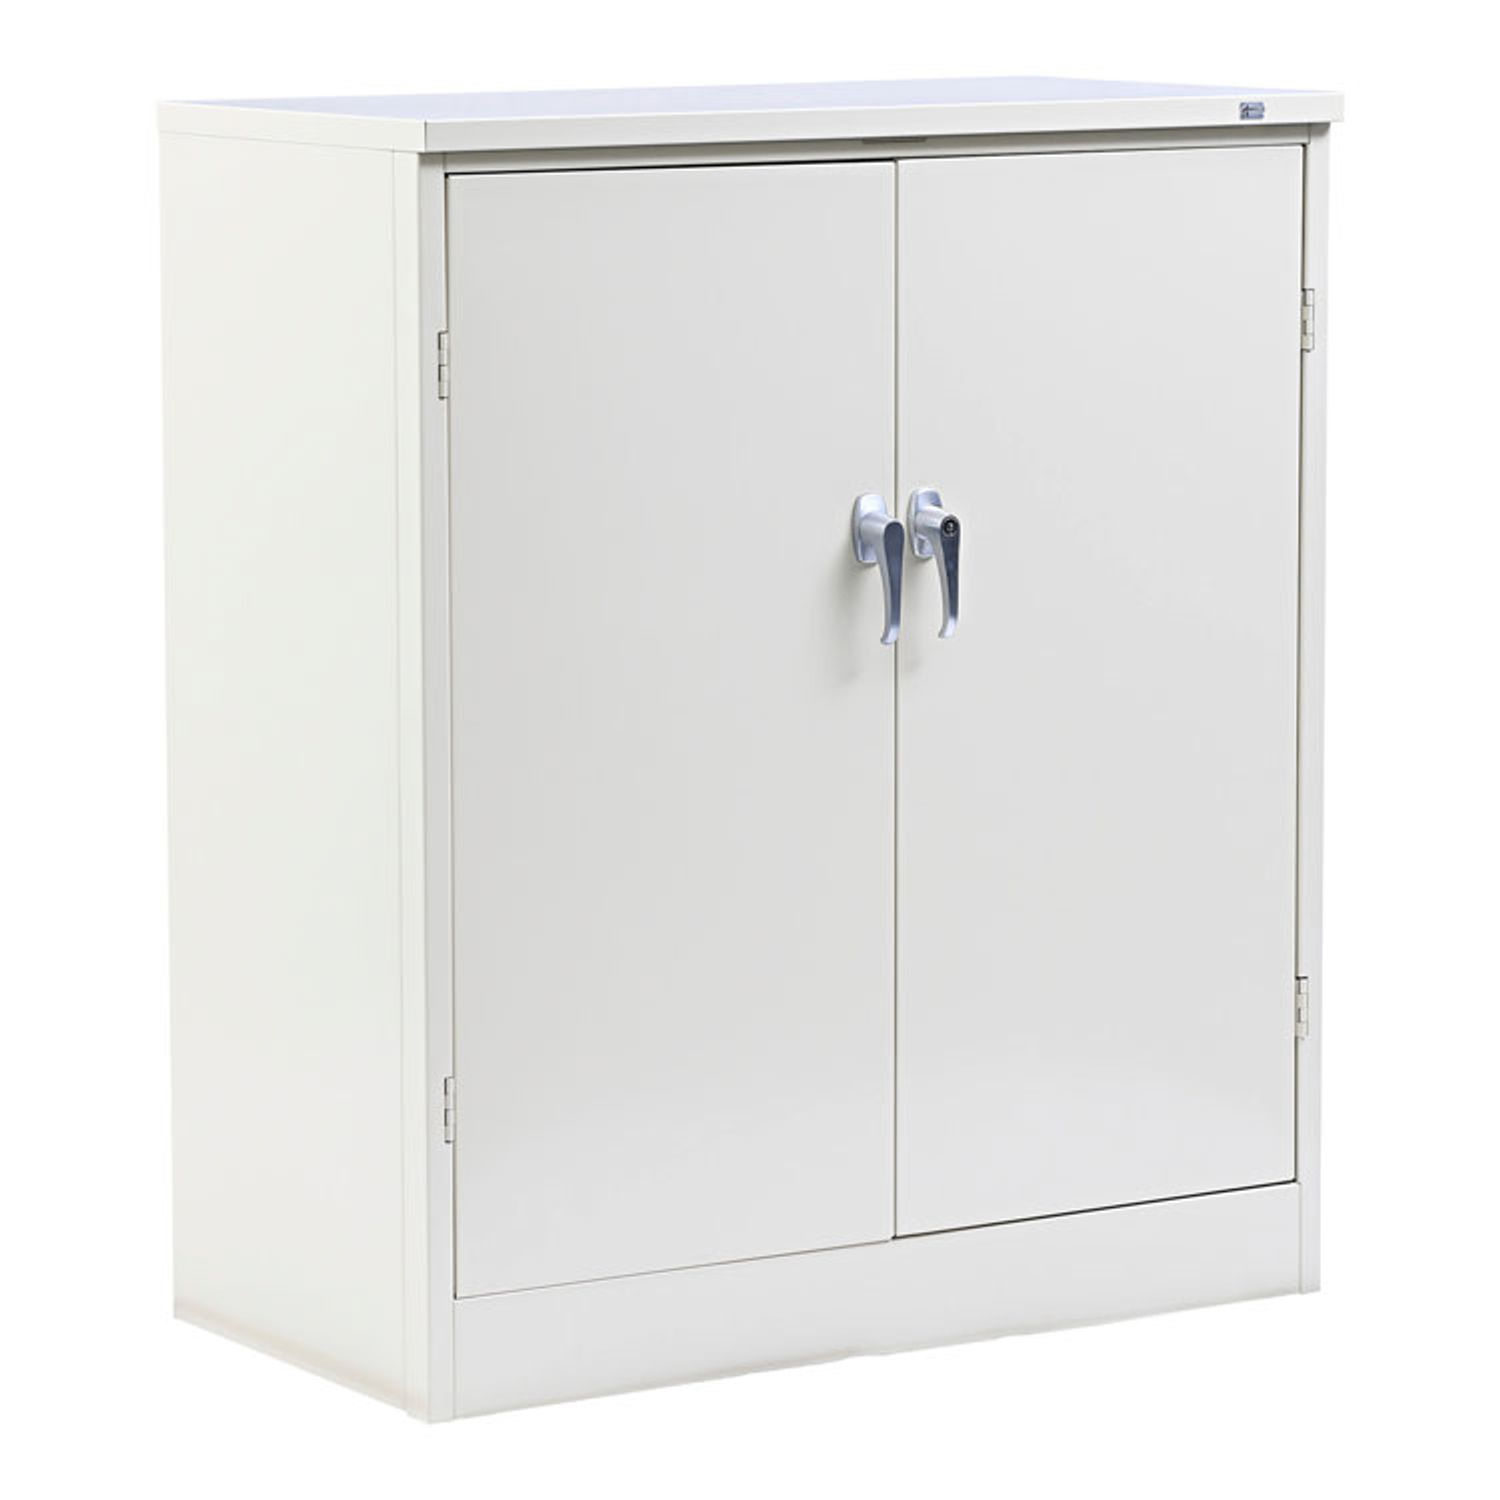 Assembled 42" High Heavy-Duty Welded Storage Cabinet Two Adjustable Shelves, 36w x 18d, Putty